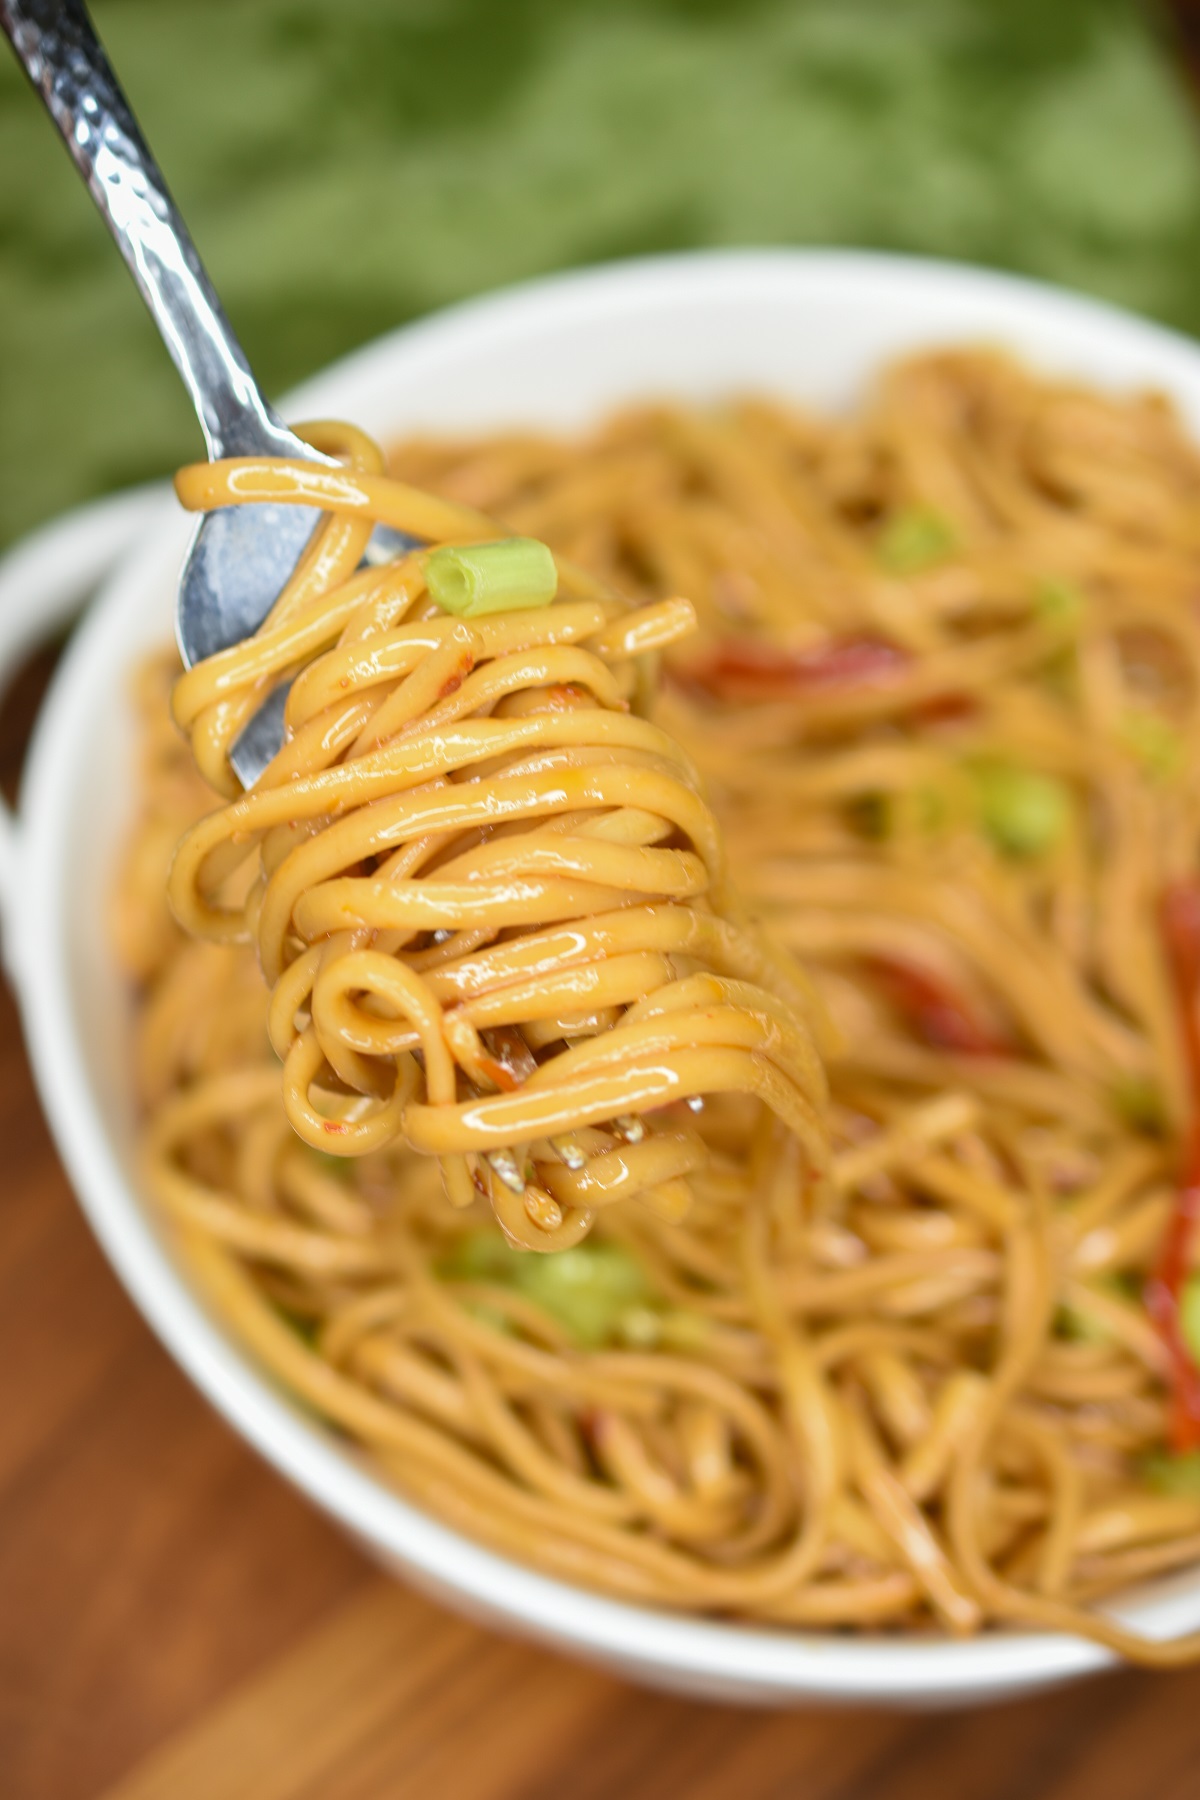 Asian Noodles recipe, sesame noodles with scallions and red peppers